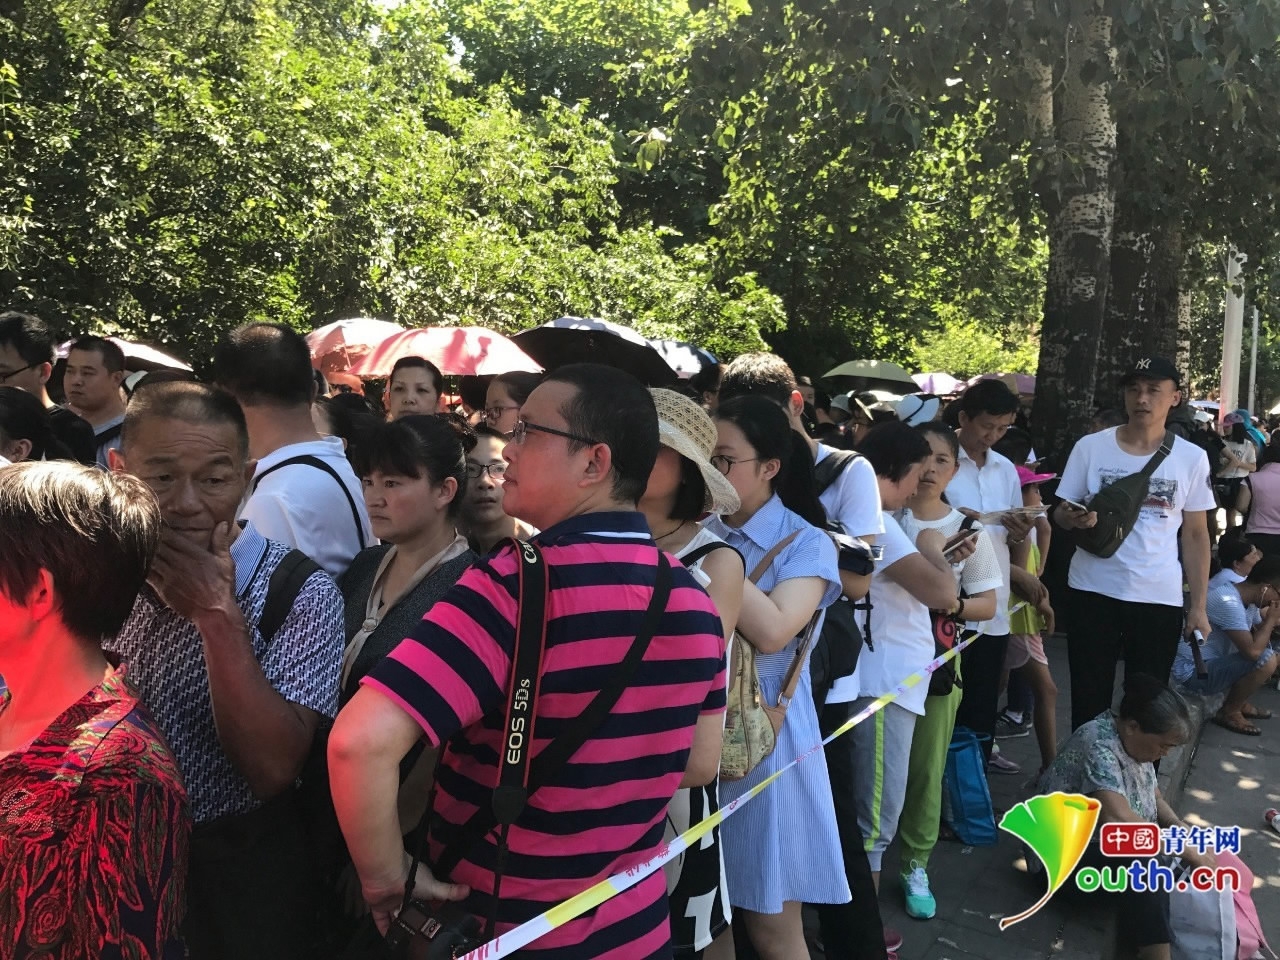 People lined up for entering Tsinghua Univerisity. [Photo: China Youth Daily]